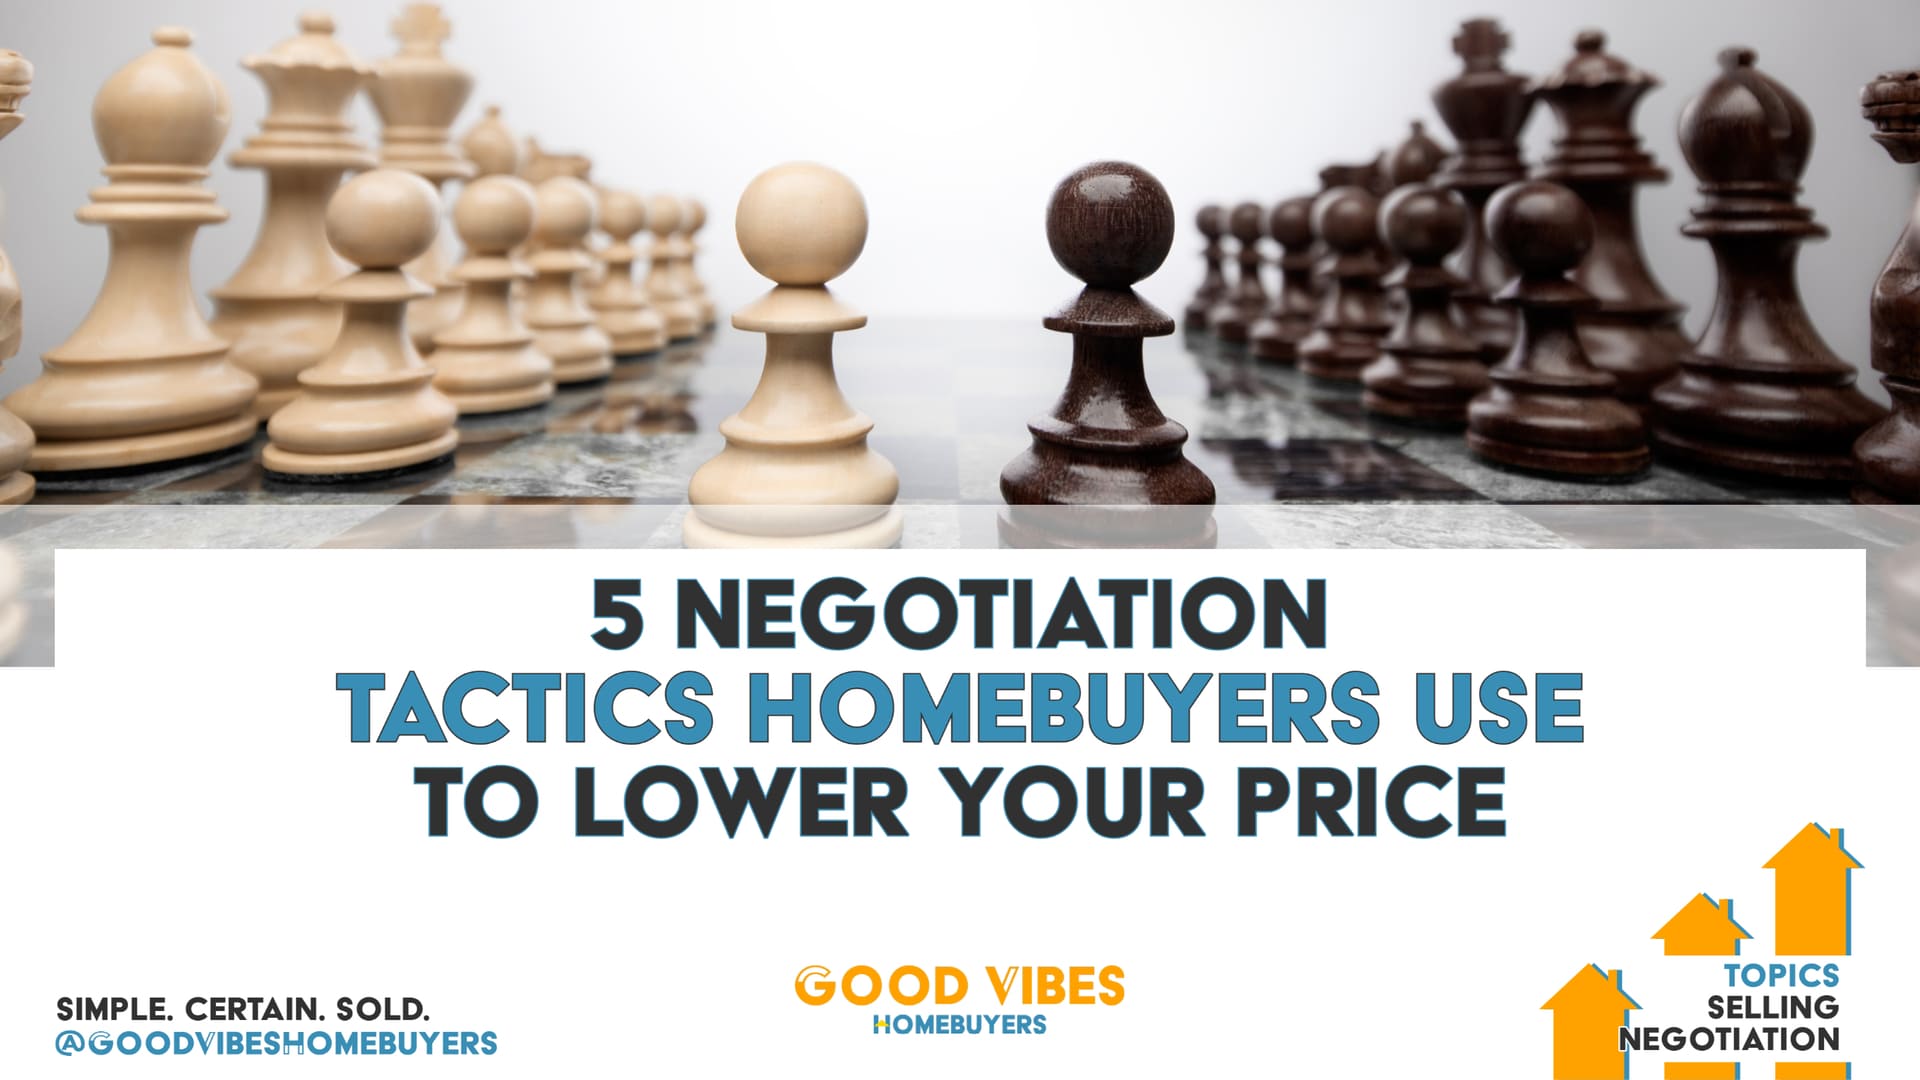 5 Negotiation Tactics Homebuyers Use to Lower Price